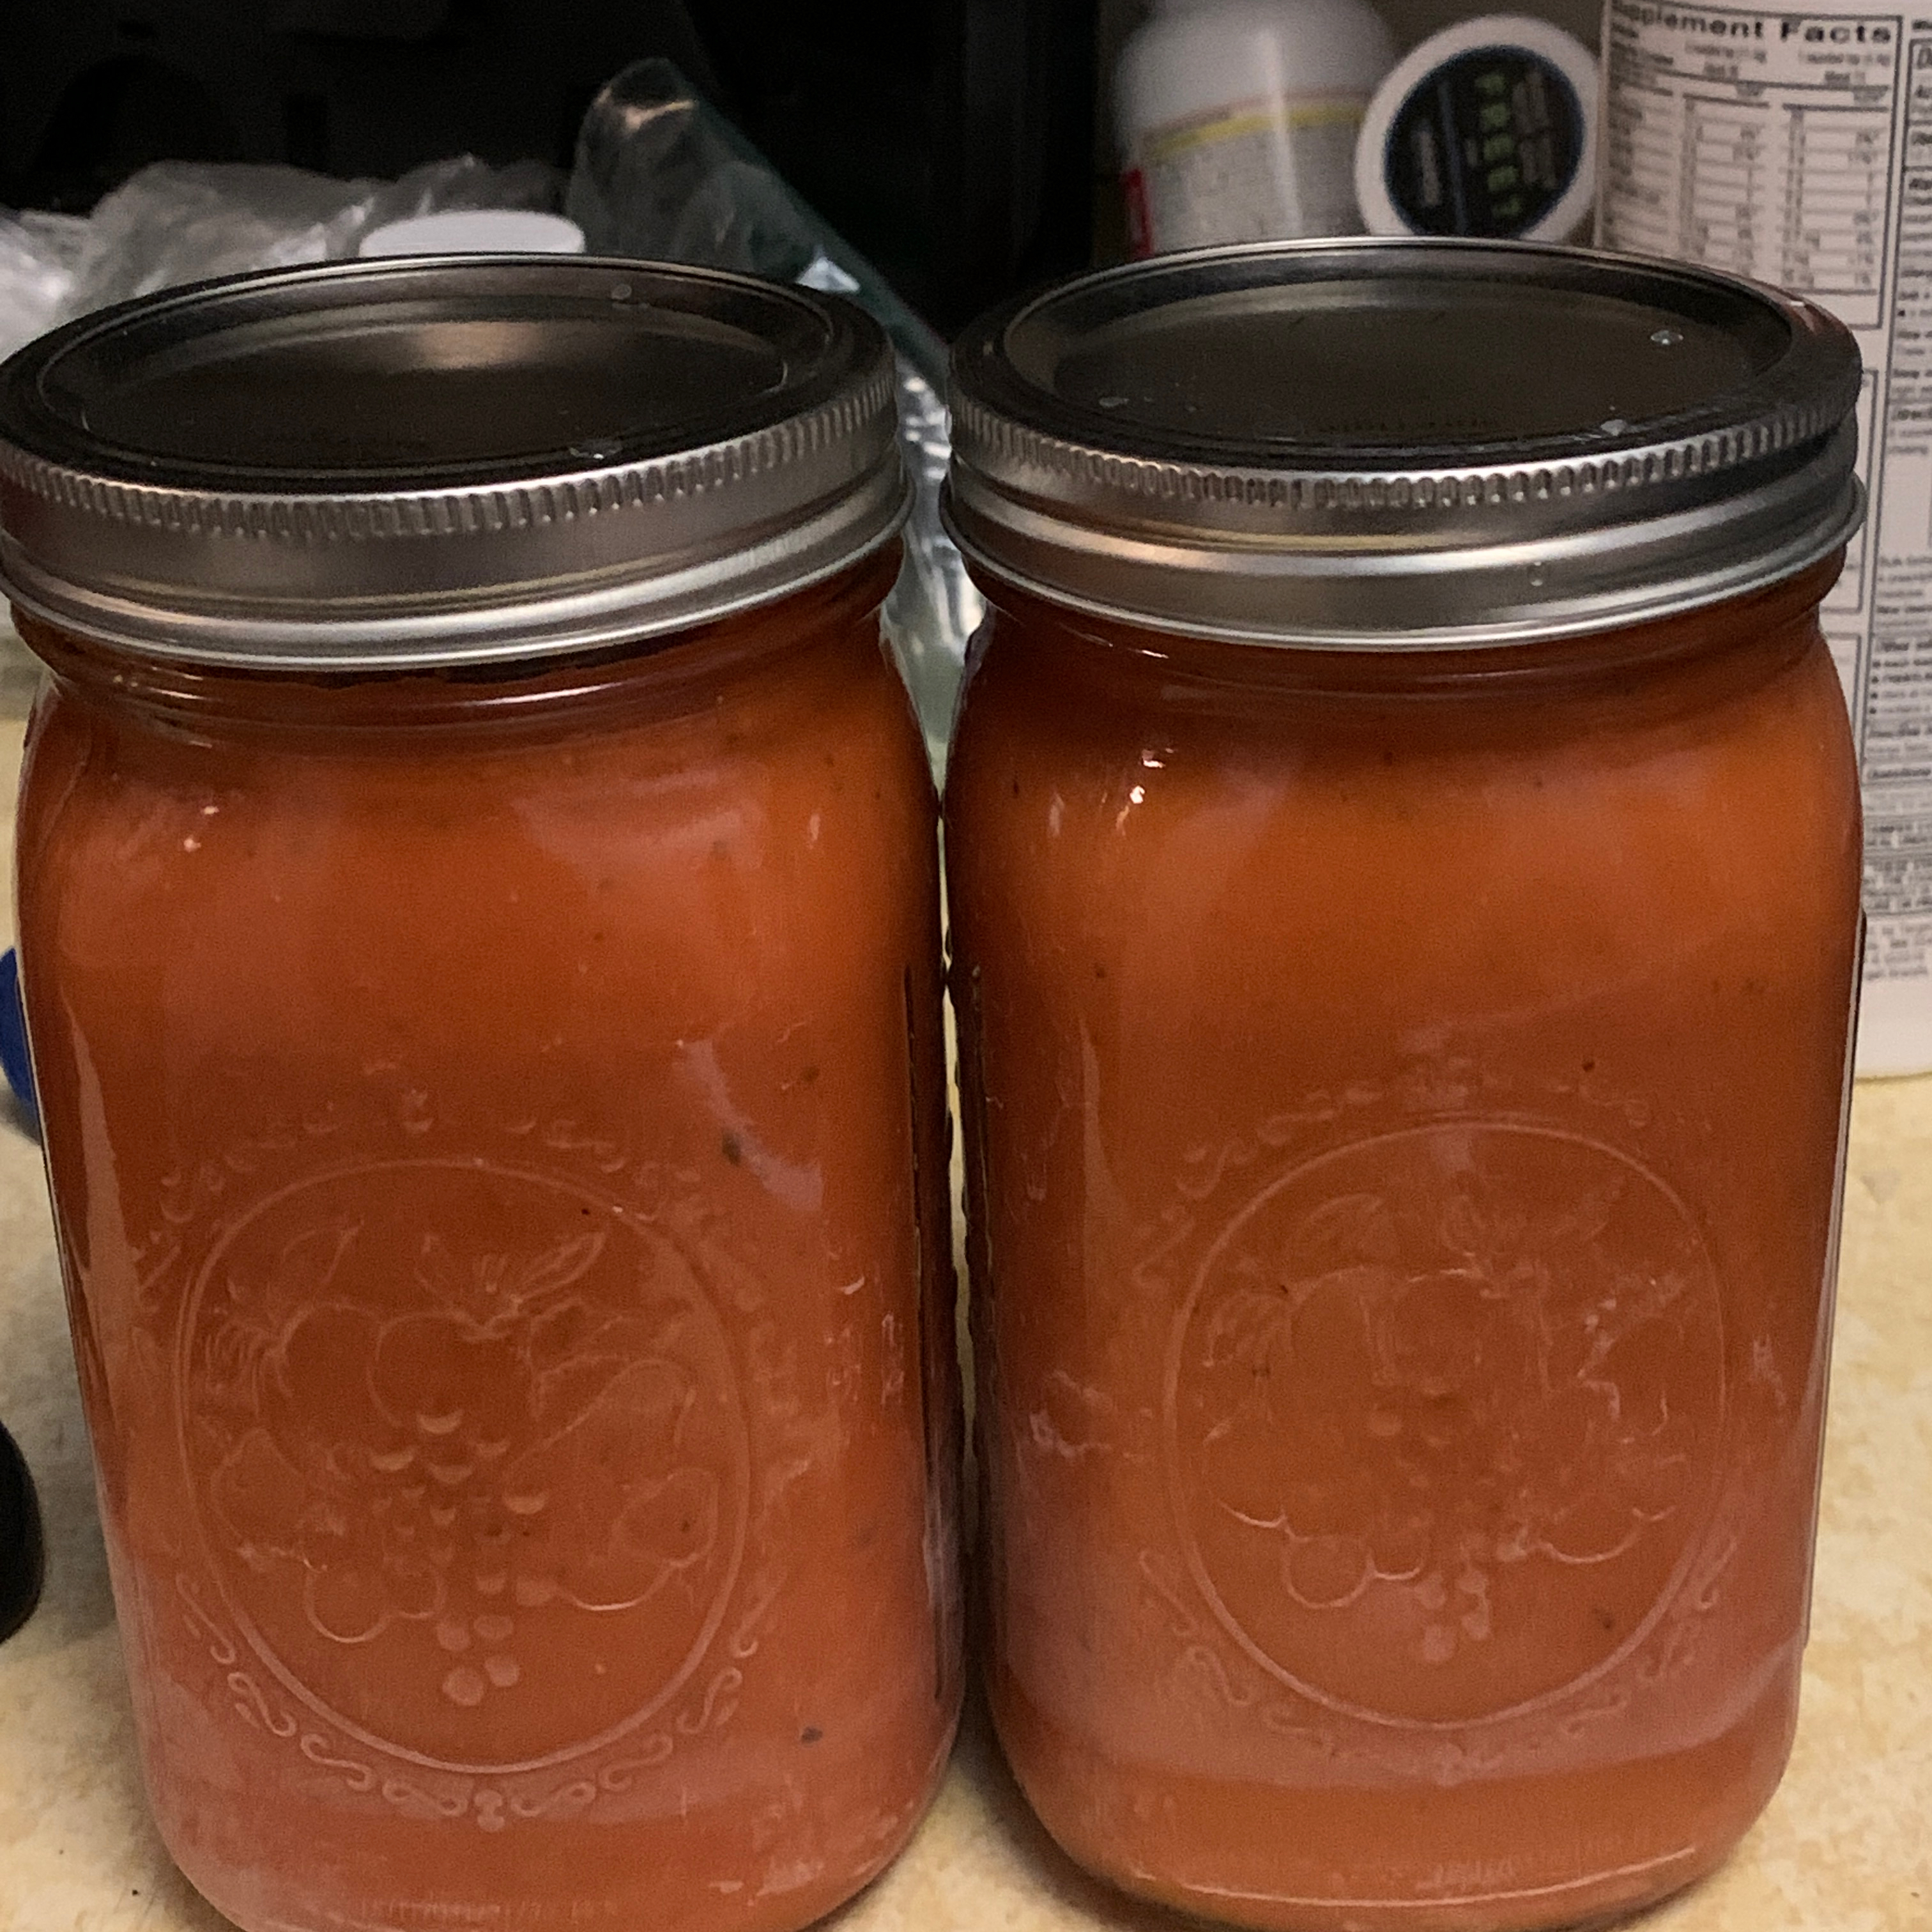 Canning Pizza or Spaghetti Sauce from Fresh Tomatoes Gregory Stoudt